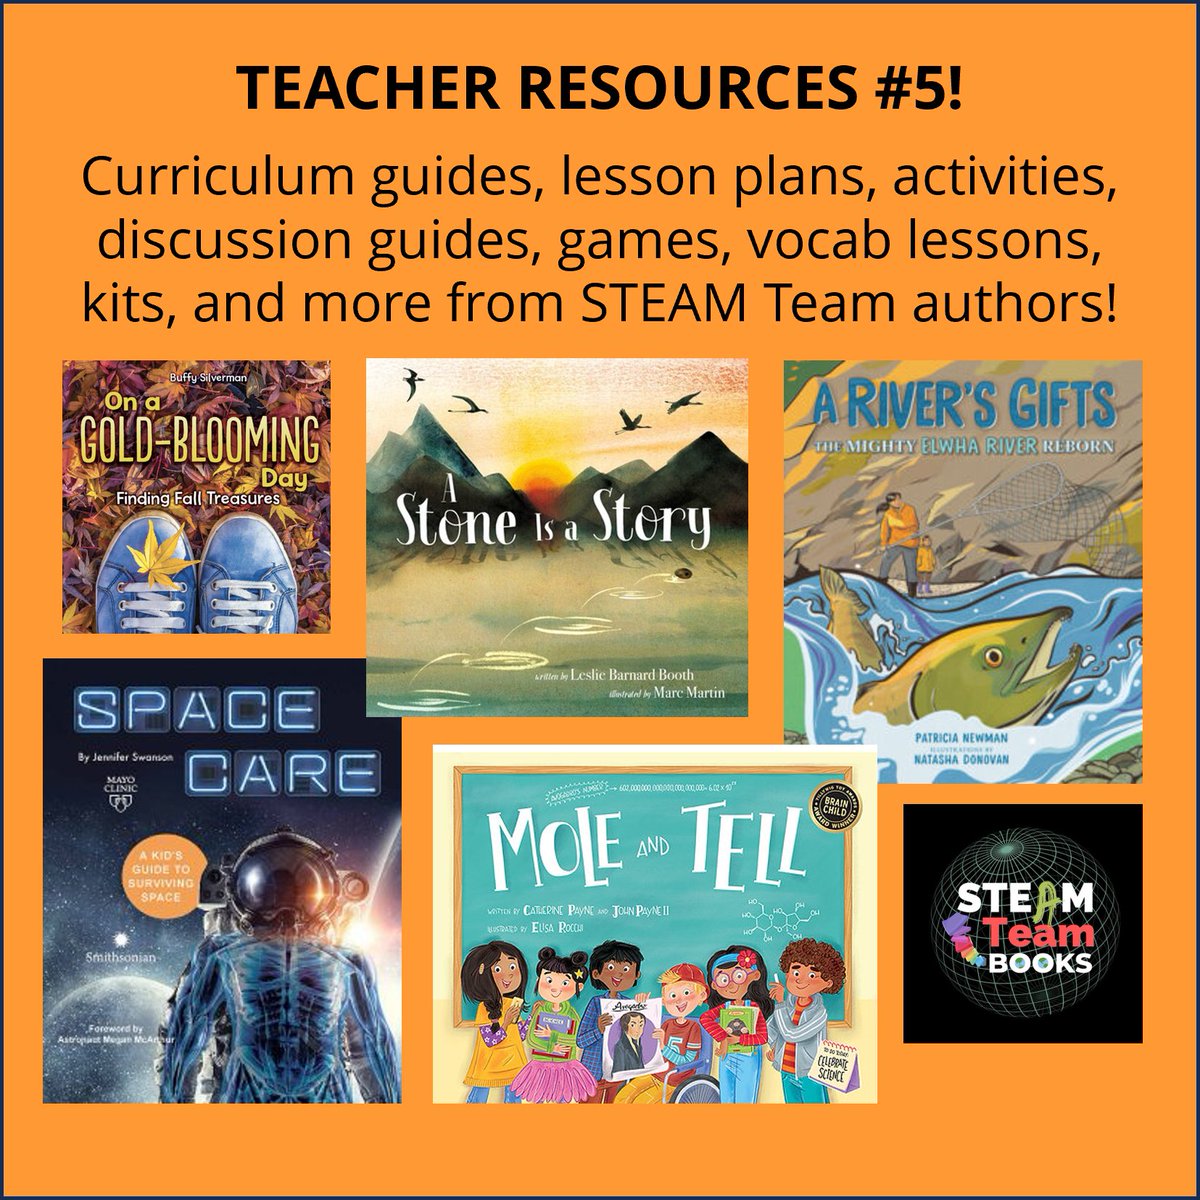 Day 5 of #resources for #teachers from @STEAMTeamBooks authors! @LBB_books lesliebarnardbooth.com/resources-stone @scinaturally and @cathyapayne-tinyurl.com/sd2cxres @PatriciaNewman patriciamnewman.com/teacher-guides/ @JenSwanBooks jenniferswansonbooks.com/teachers-guide… @BuffySilverman buffysilverman.com/on-a-gold-bloo…